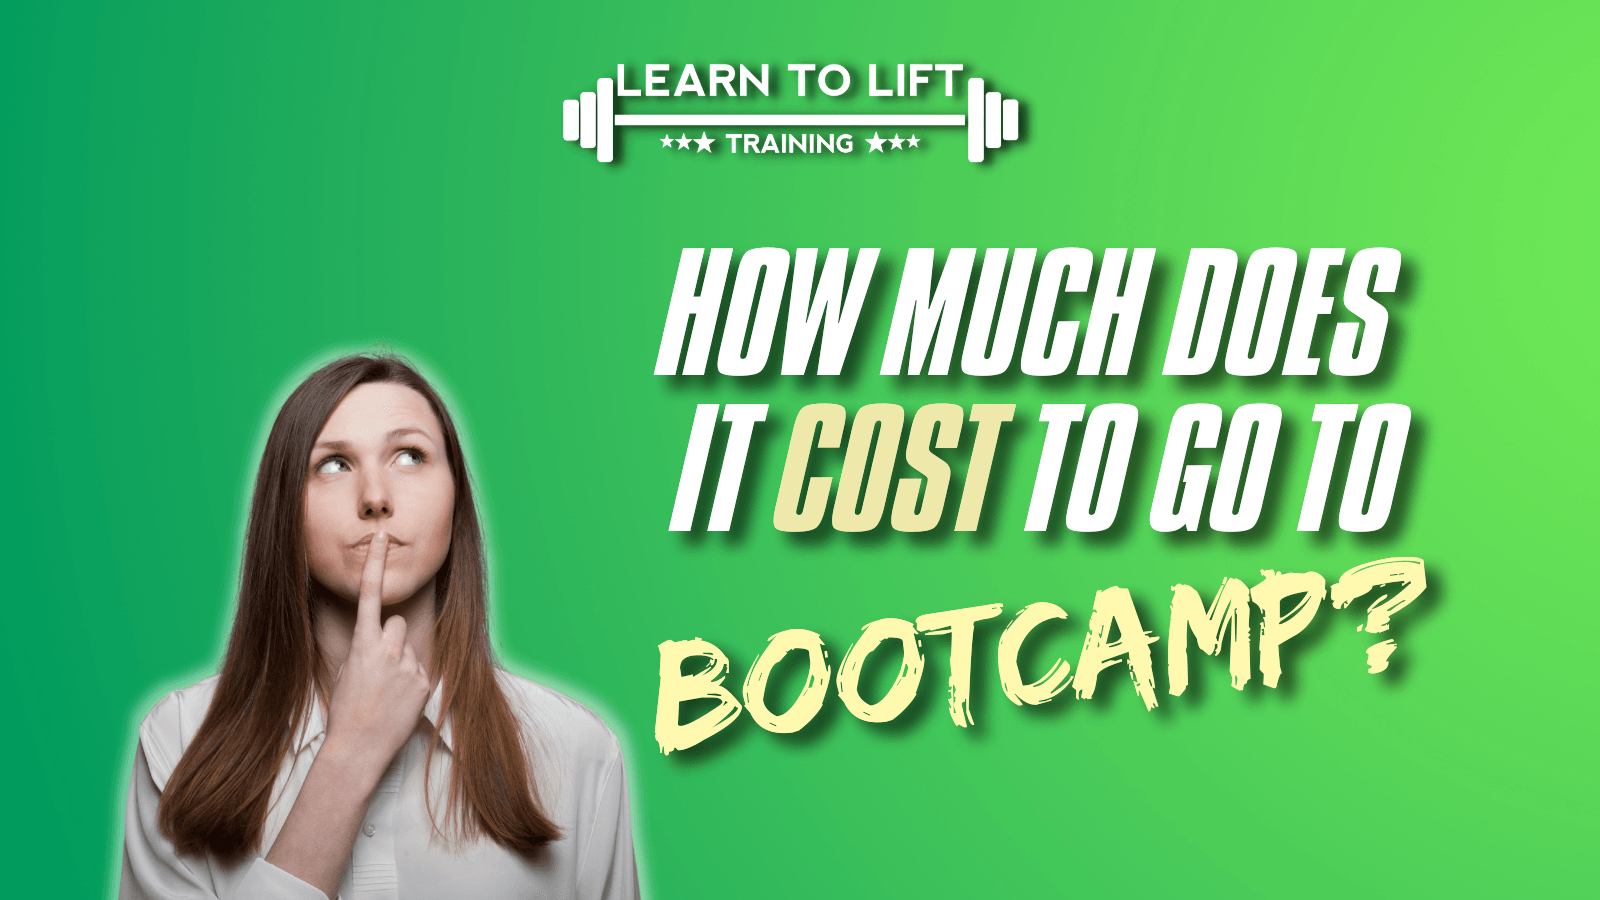 Bootcamp Glasgow - How Much Does It Cost To Go To Bootcamp?